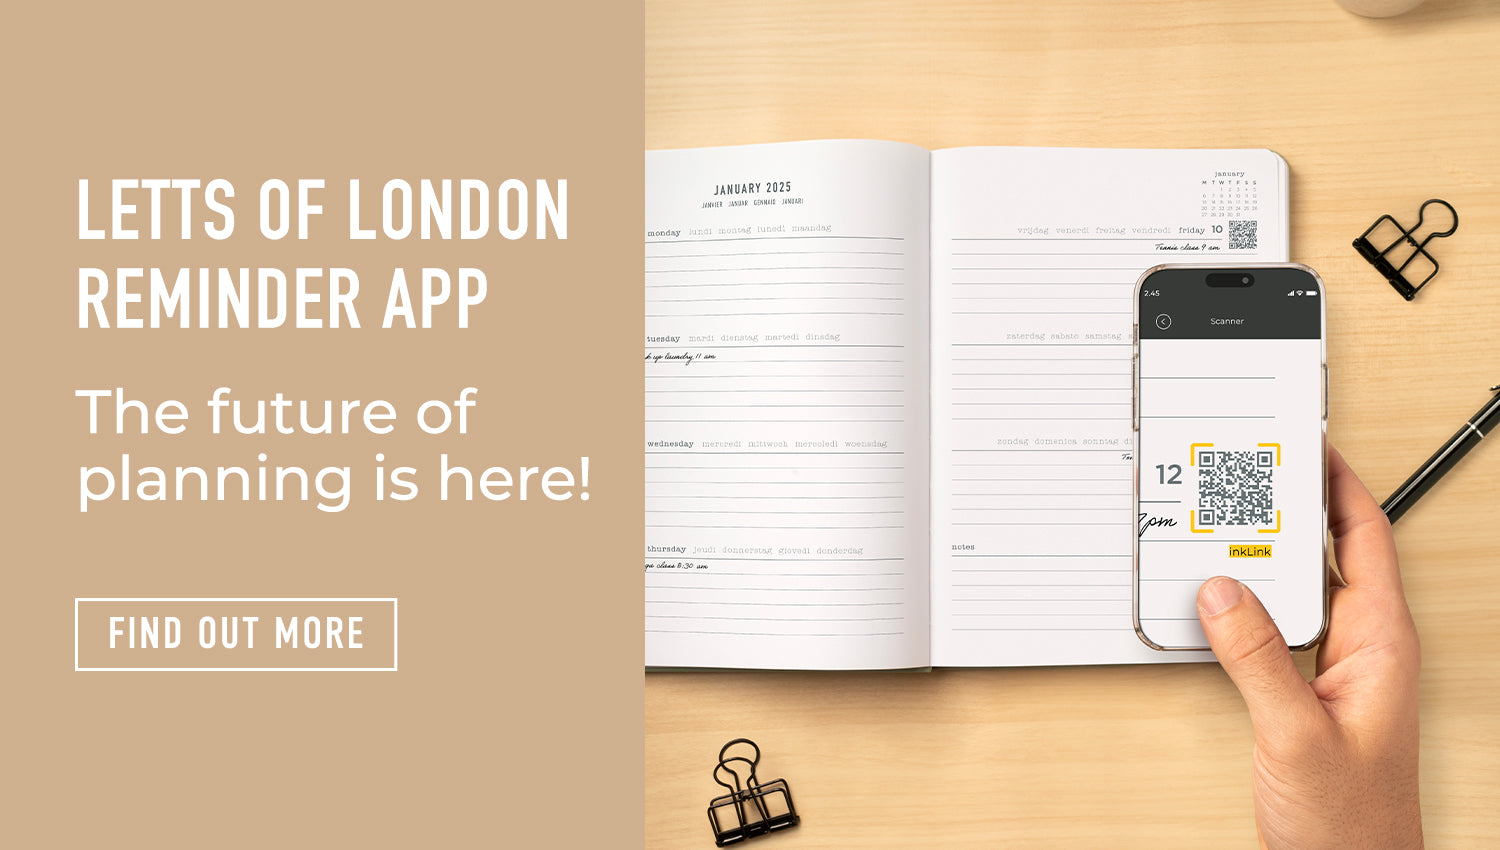 Letts of London Reminder App - The future of planning is here!